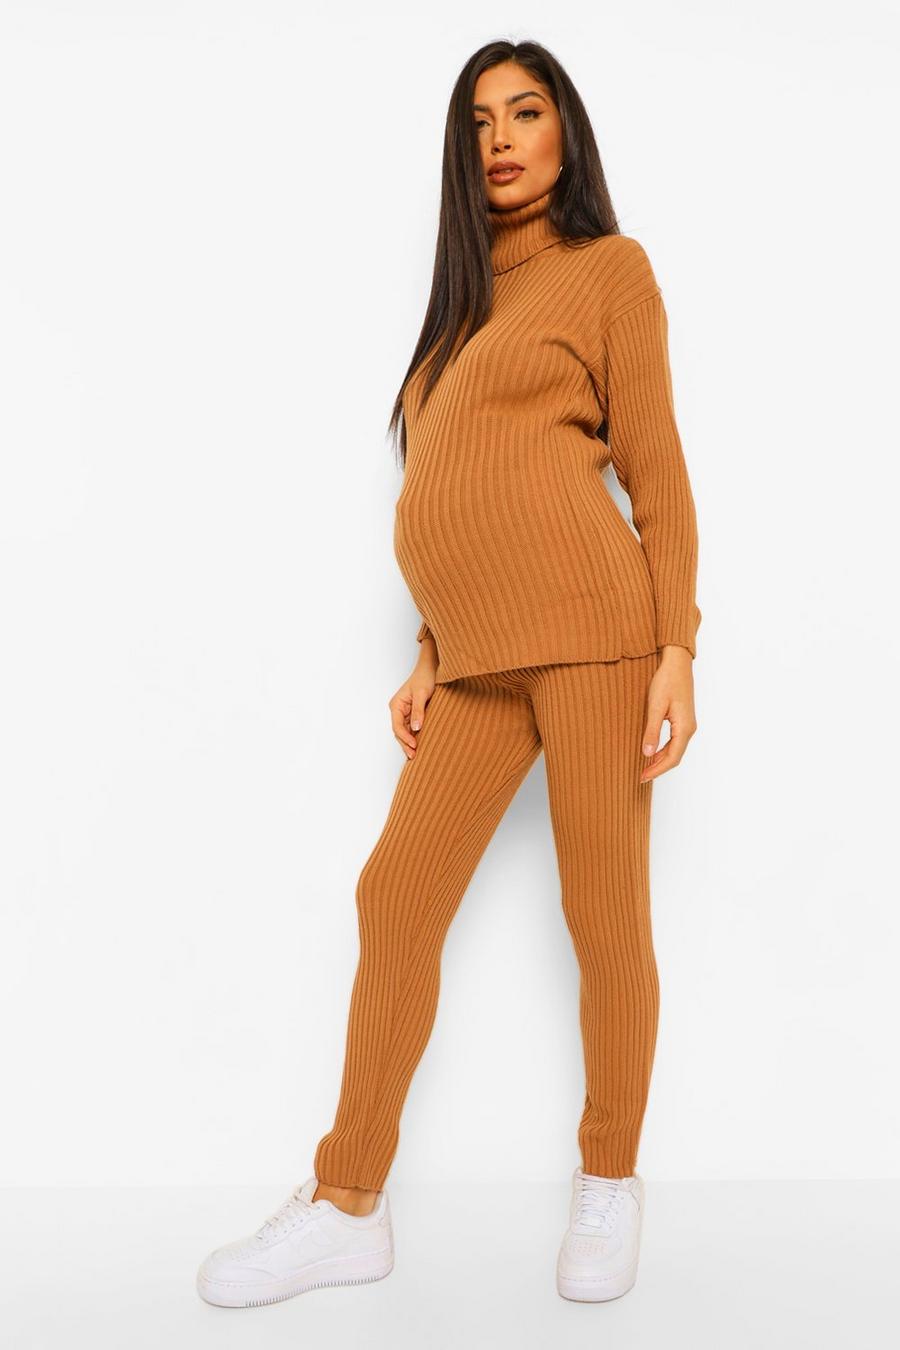 Camel beige Maternity Jumper And Leggings Knitted Rib Co-ord